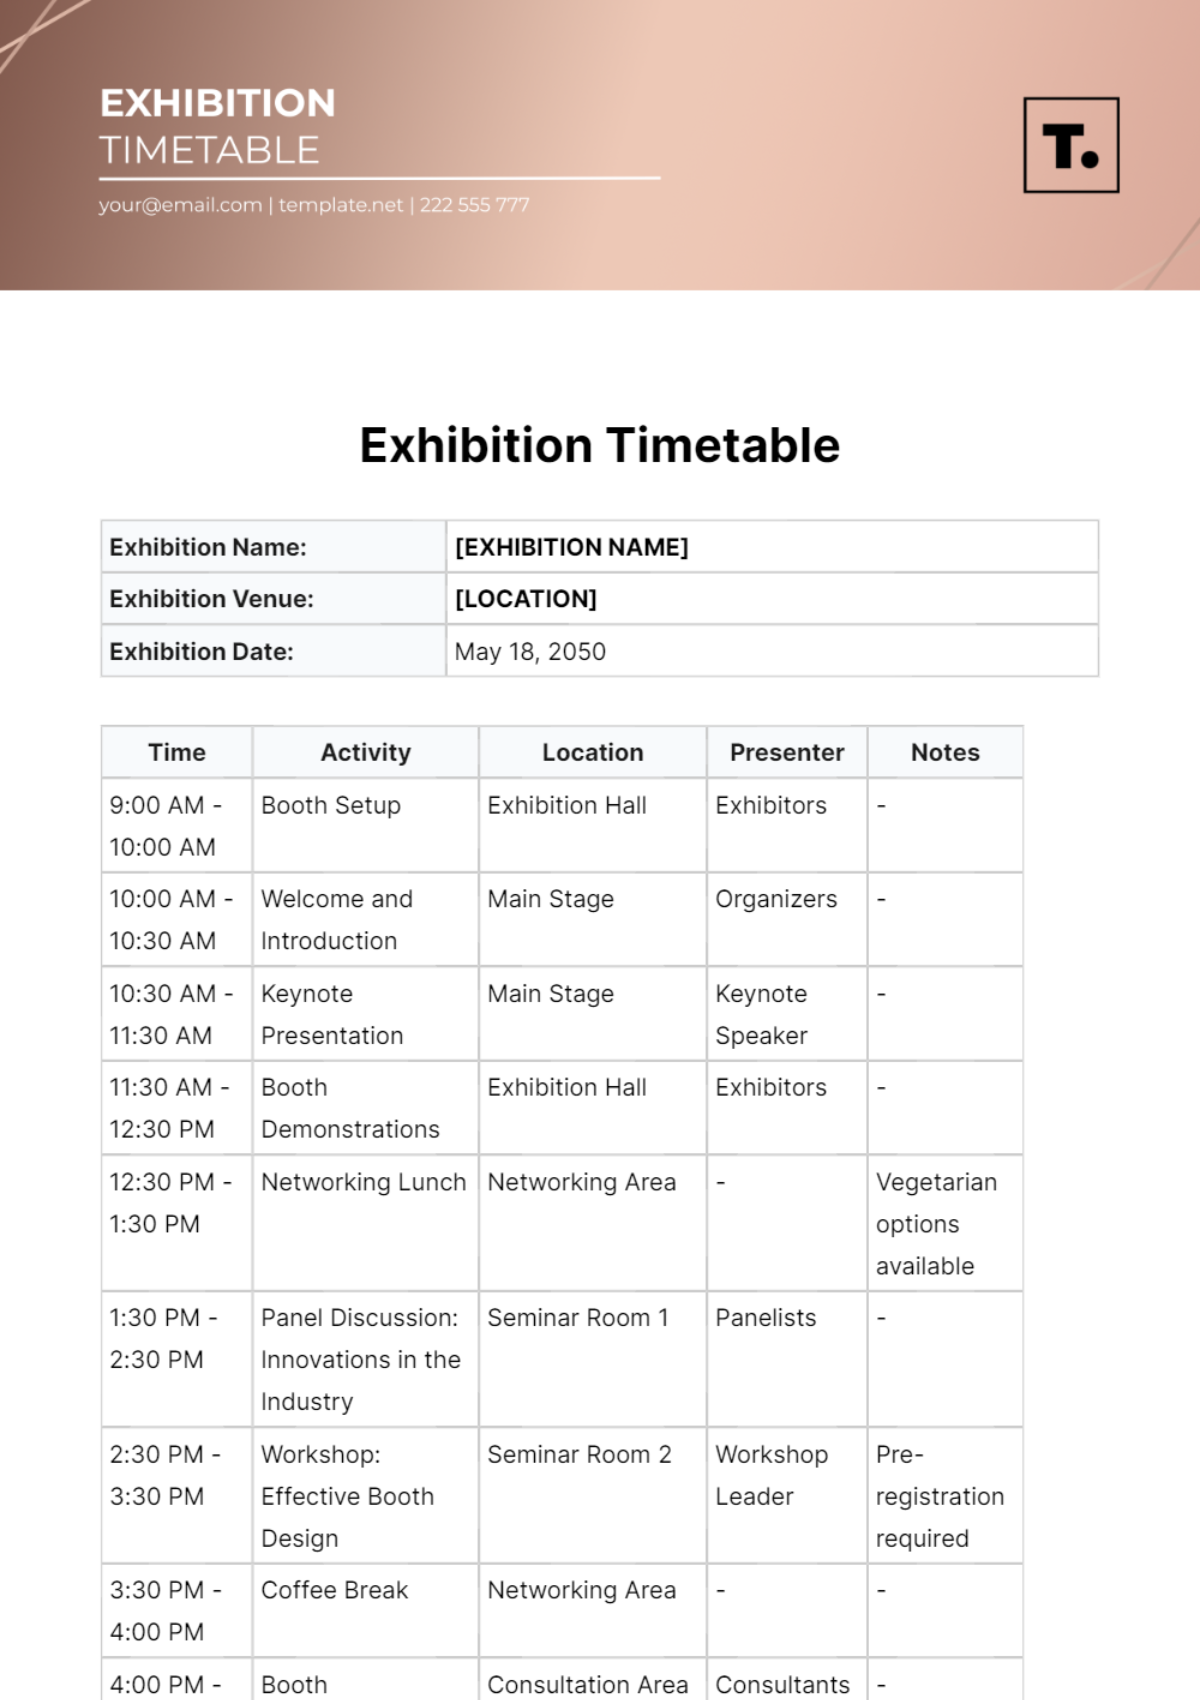 Exhibition Timetable Template